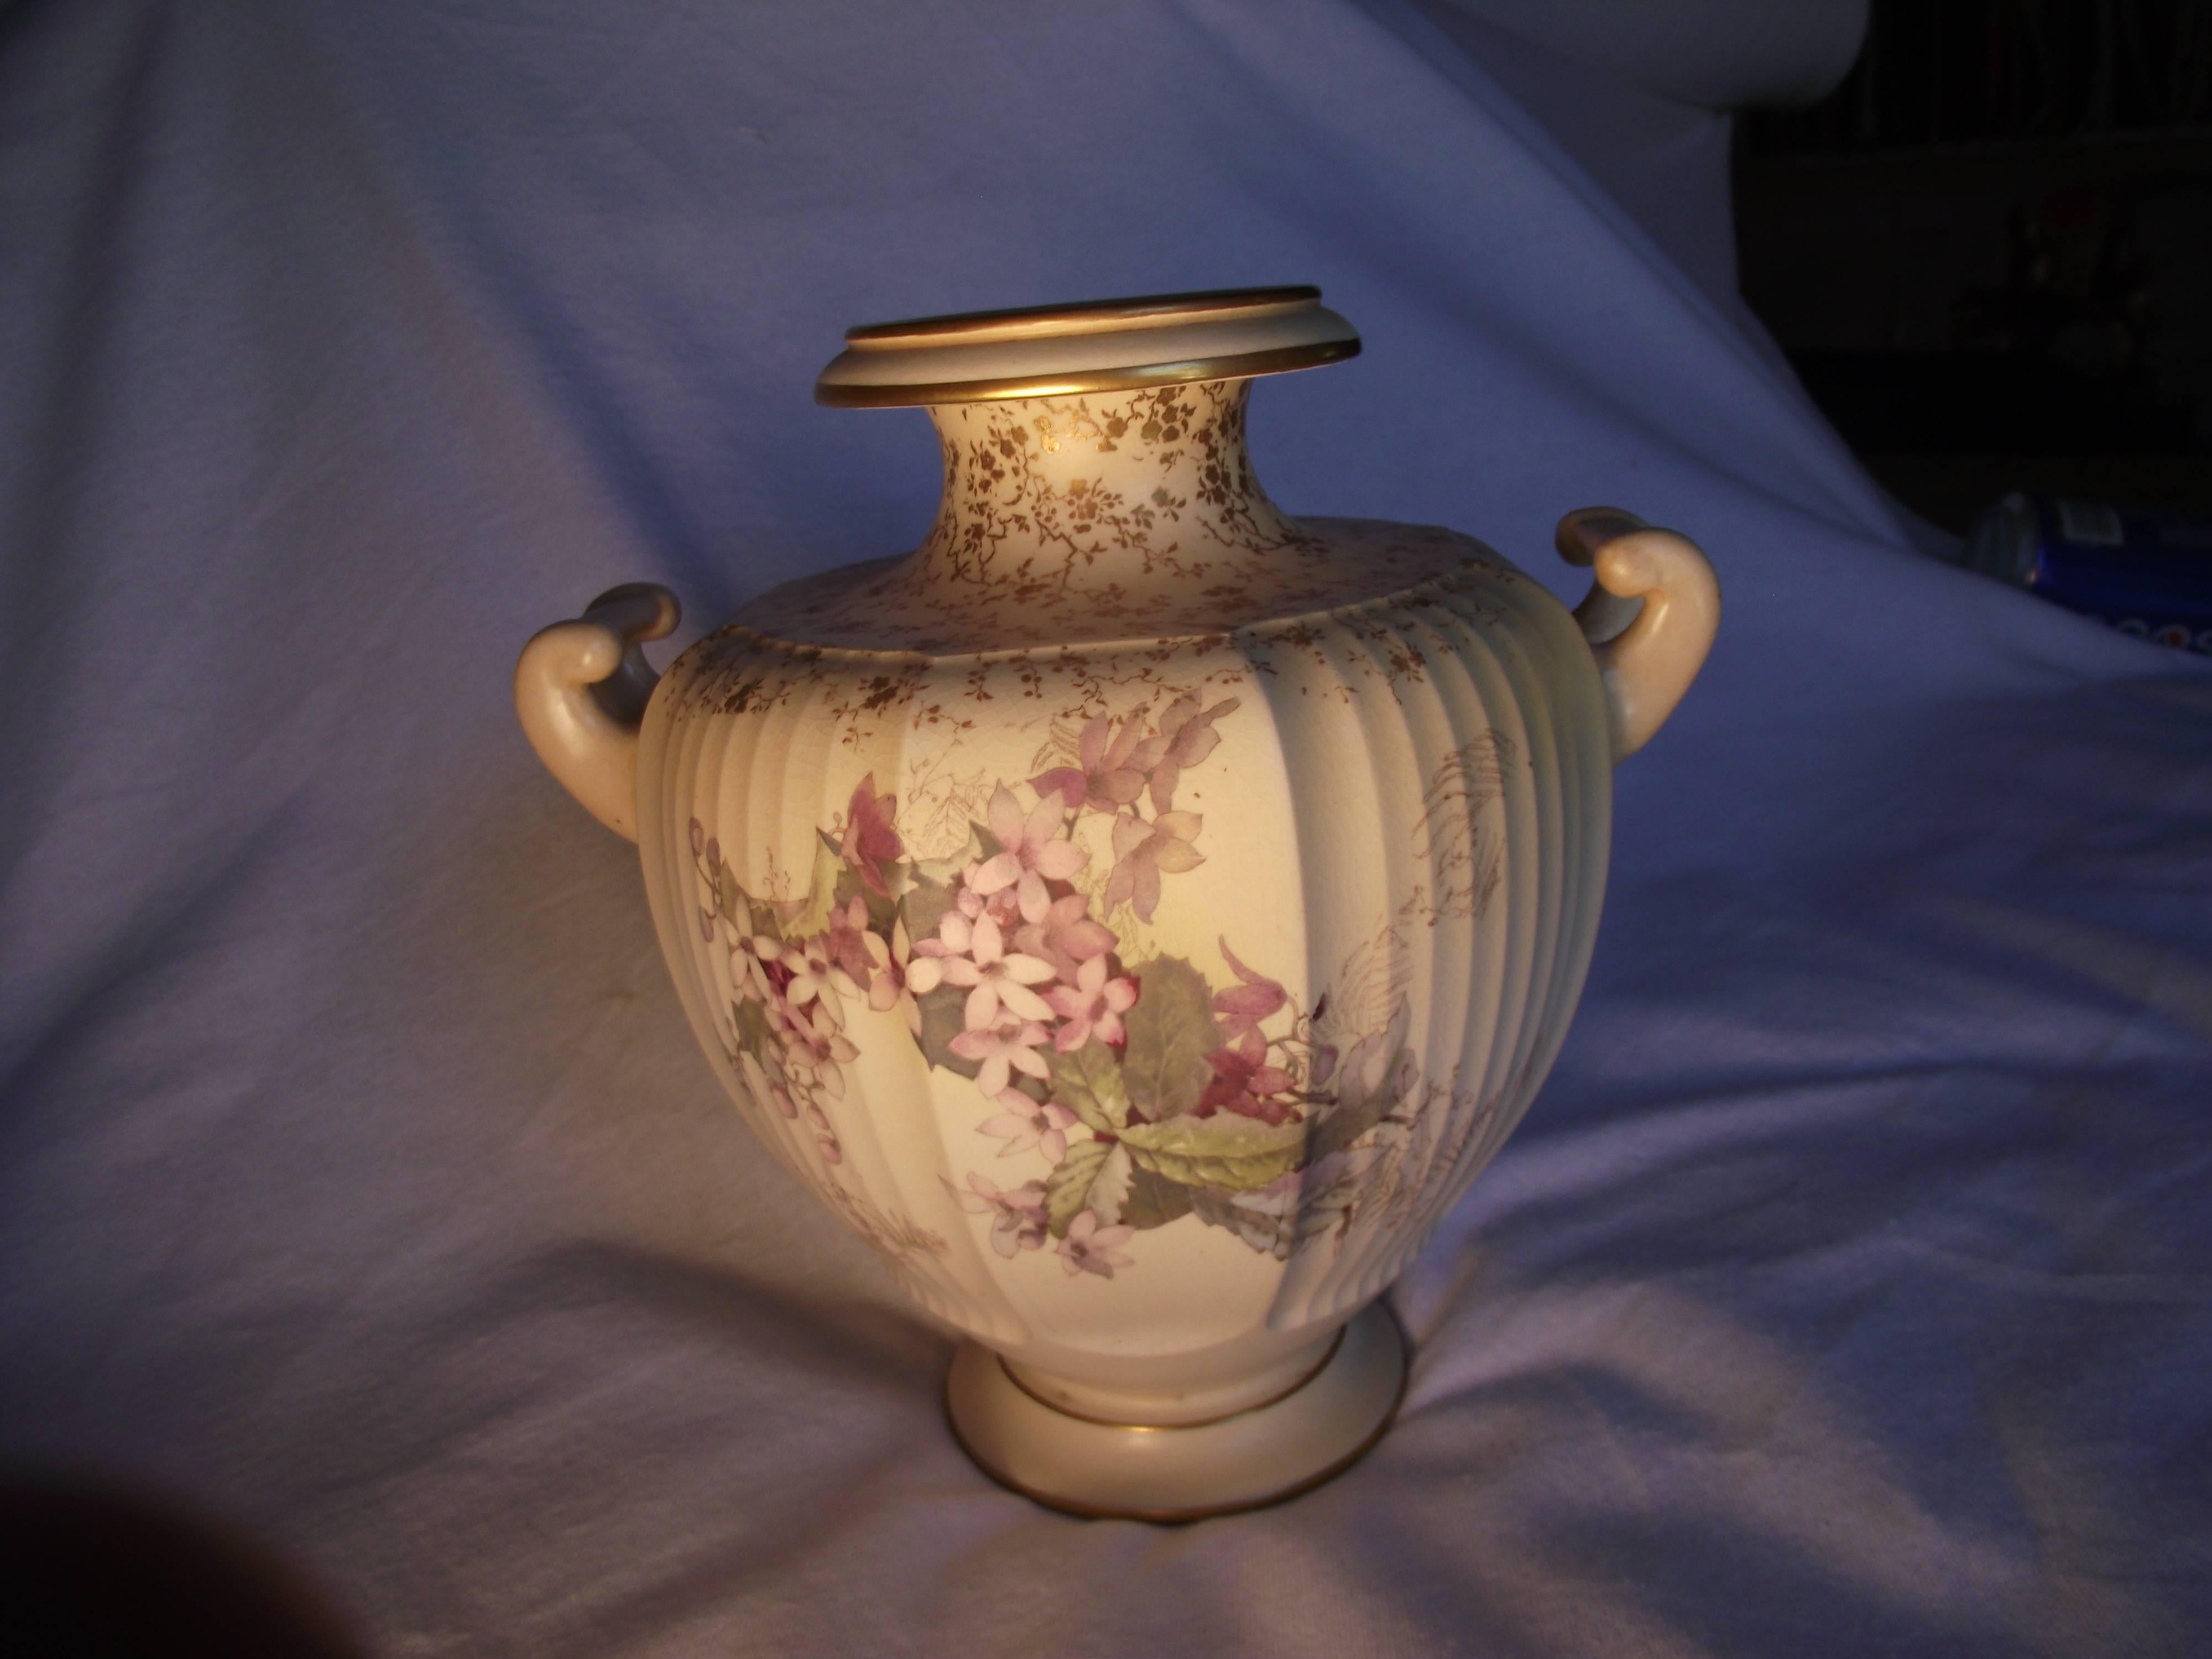 Doulton Burslem Double Handled Vase In Good Condition For Sale In Harrisburg, PA